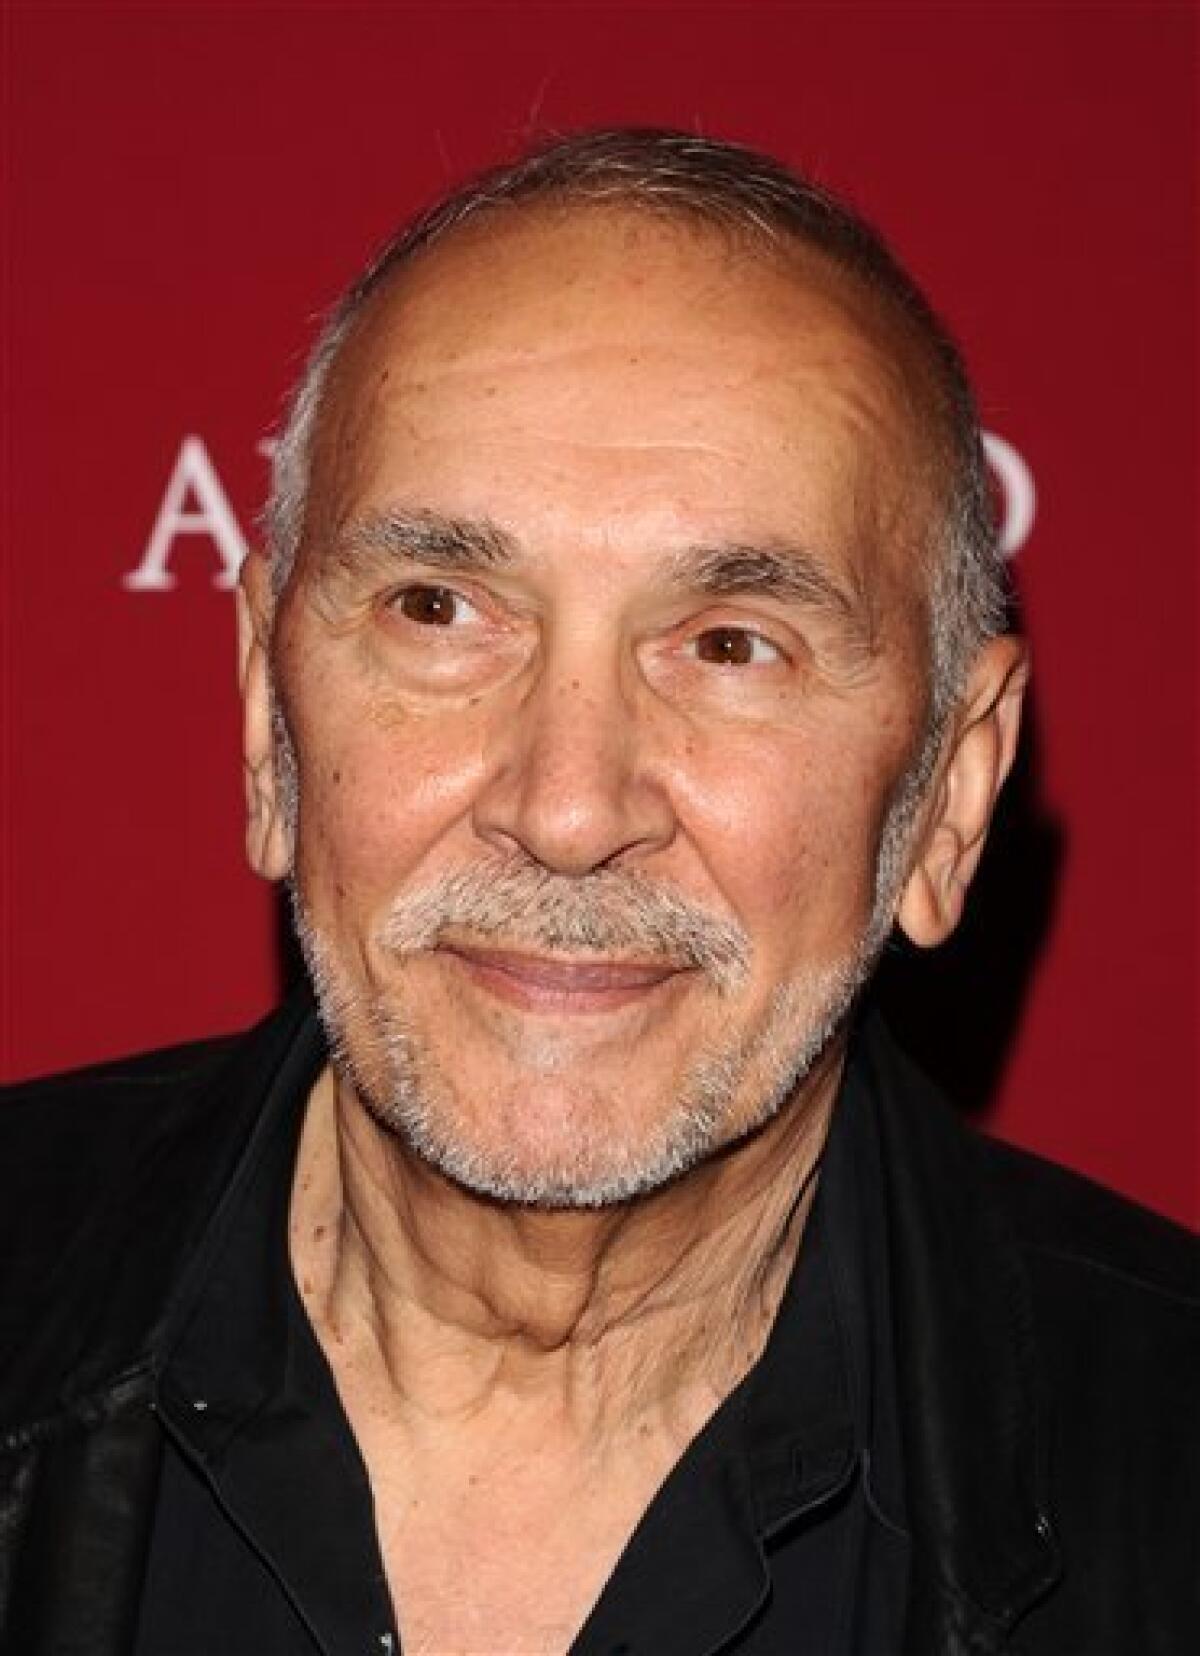 FILE - In this Dec. 1, 2010 file photo, actor Frank Langella attends the premiere of "All Good Things" in New York. (AP Photo/Peter Kramer, file)